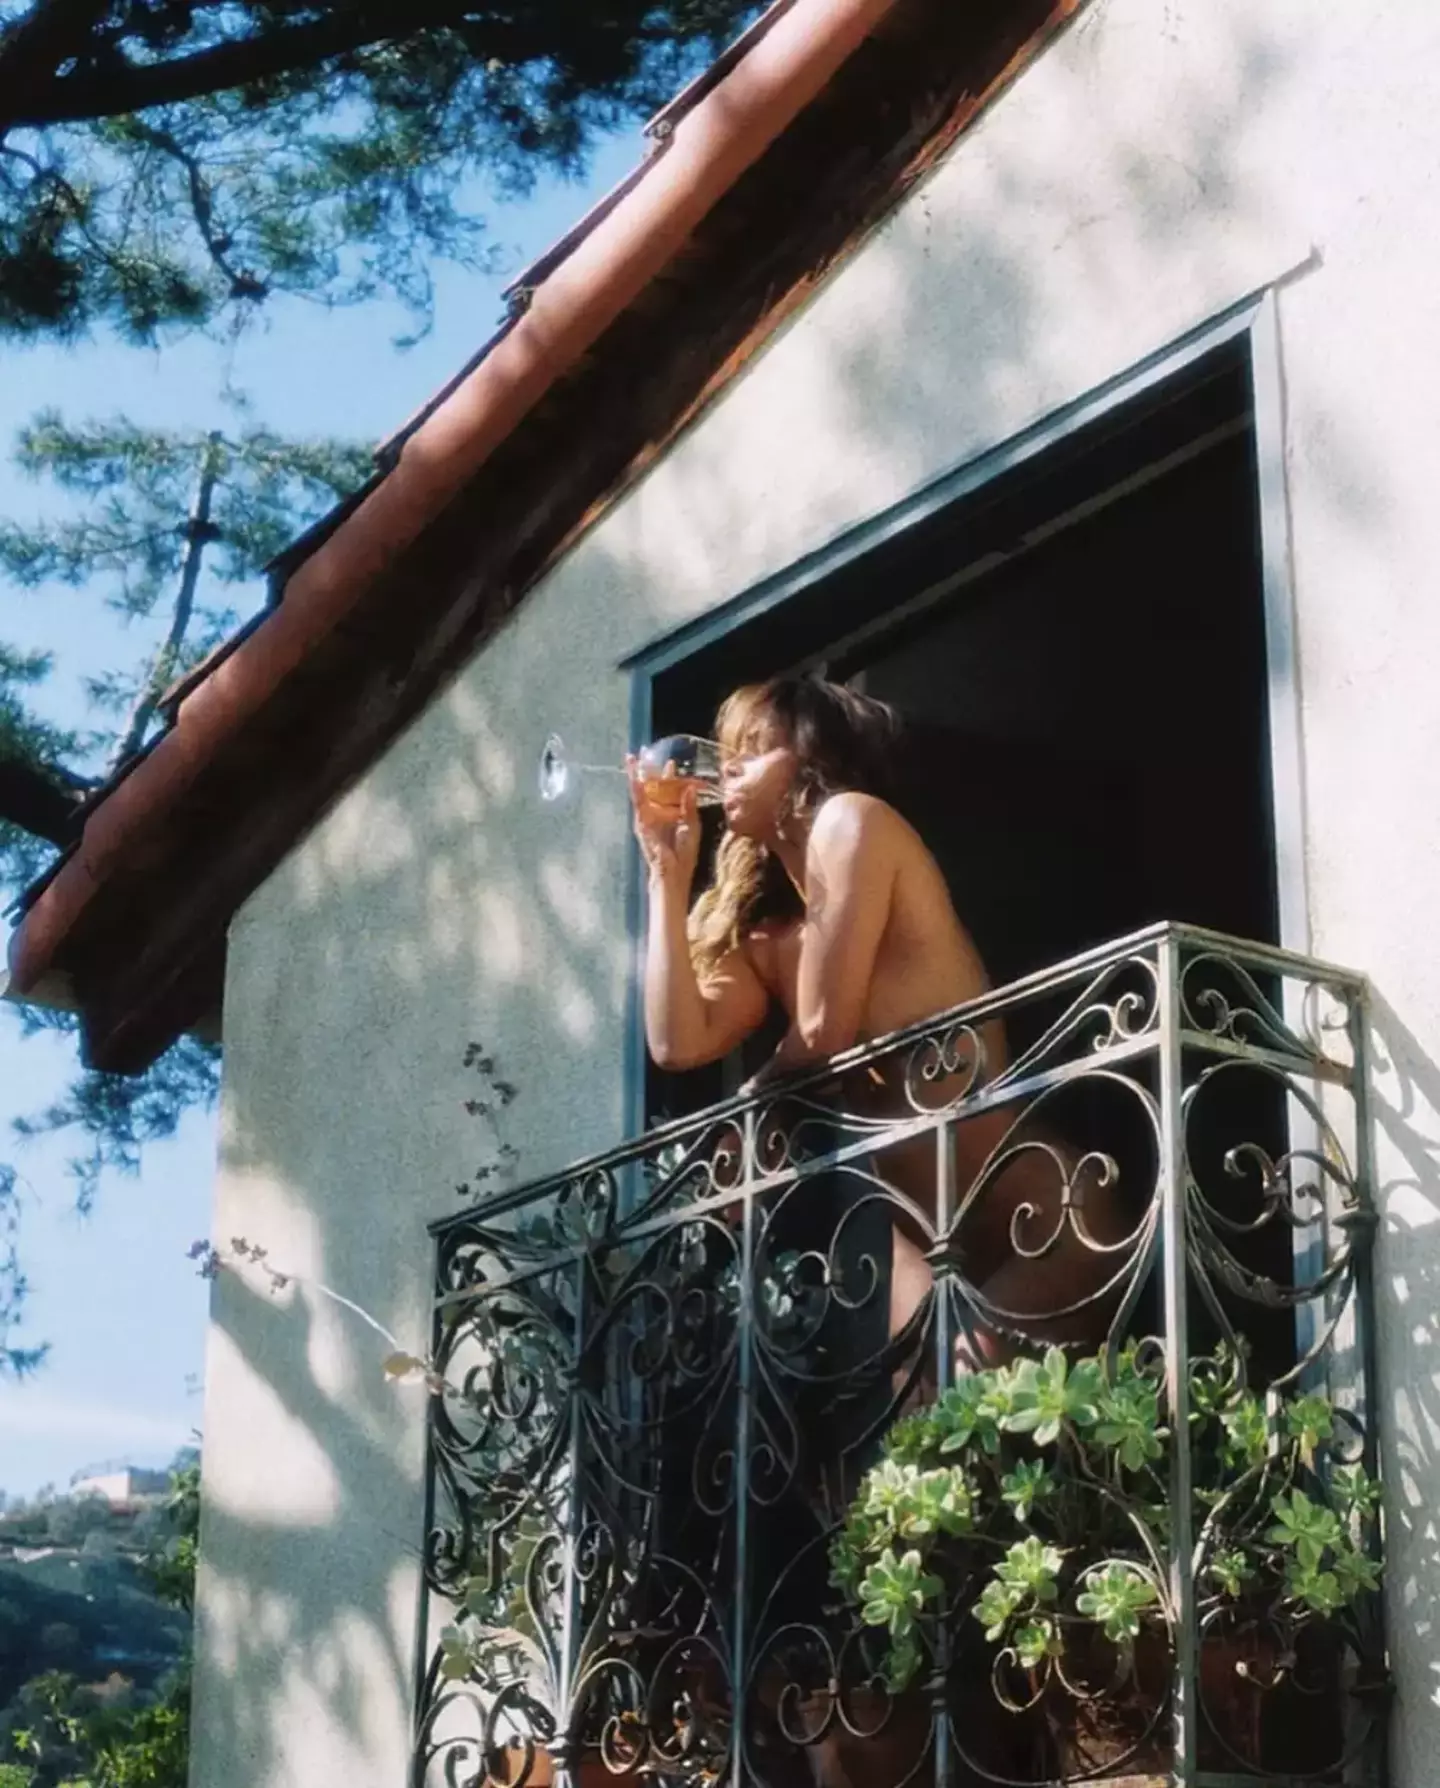 Halle Berry posted a naked photograph of herself drinking wine on a balcony on Instagram.